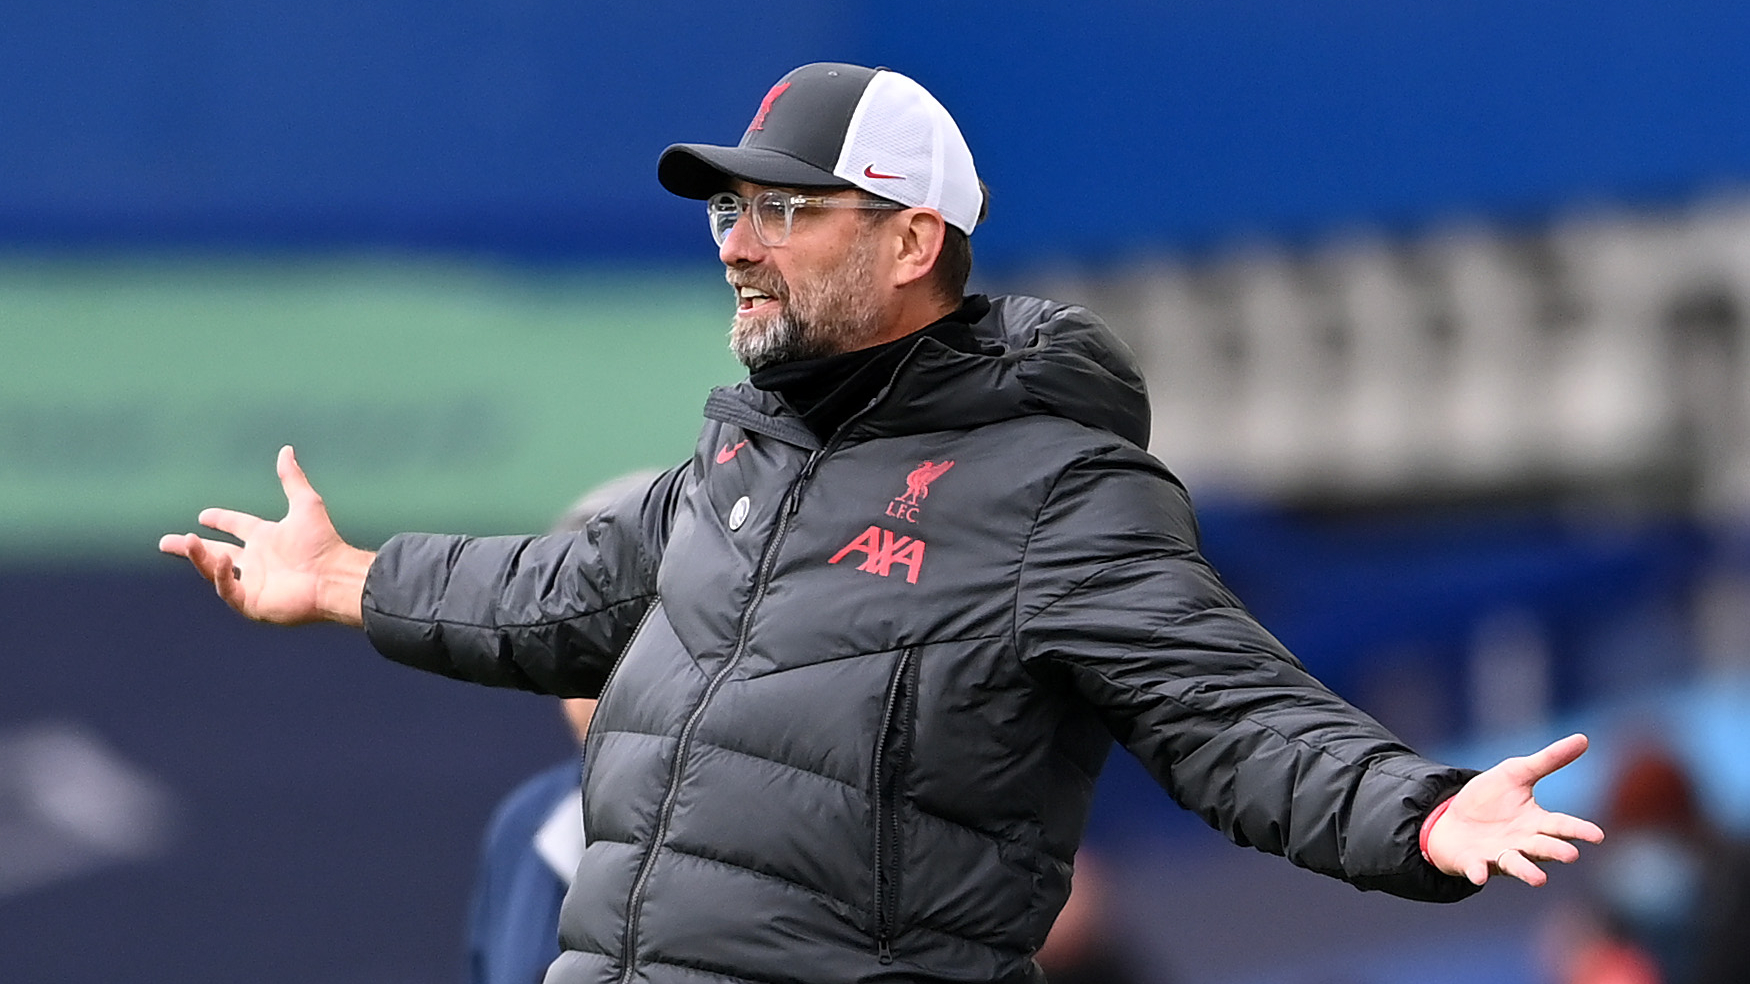 Klopp says Liverpool must be 'close to perfection' to win another Premier League title